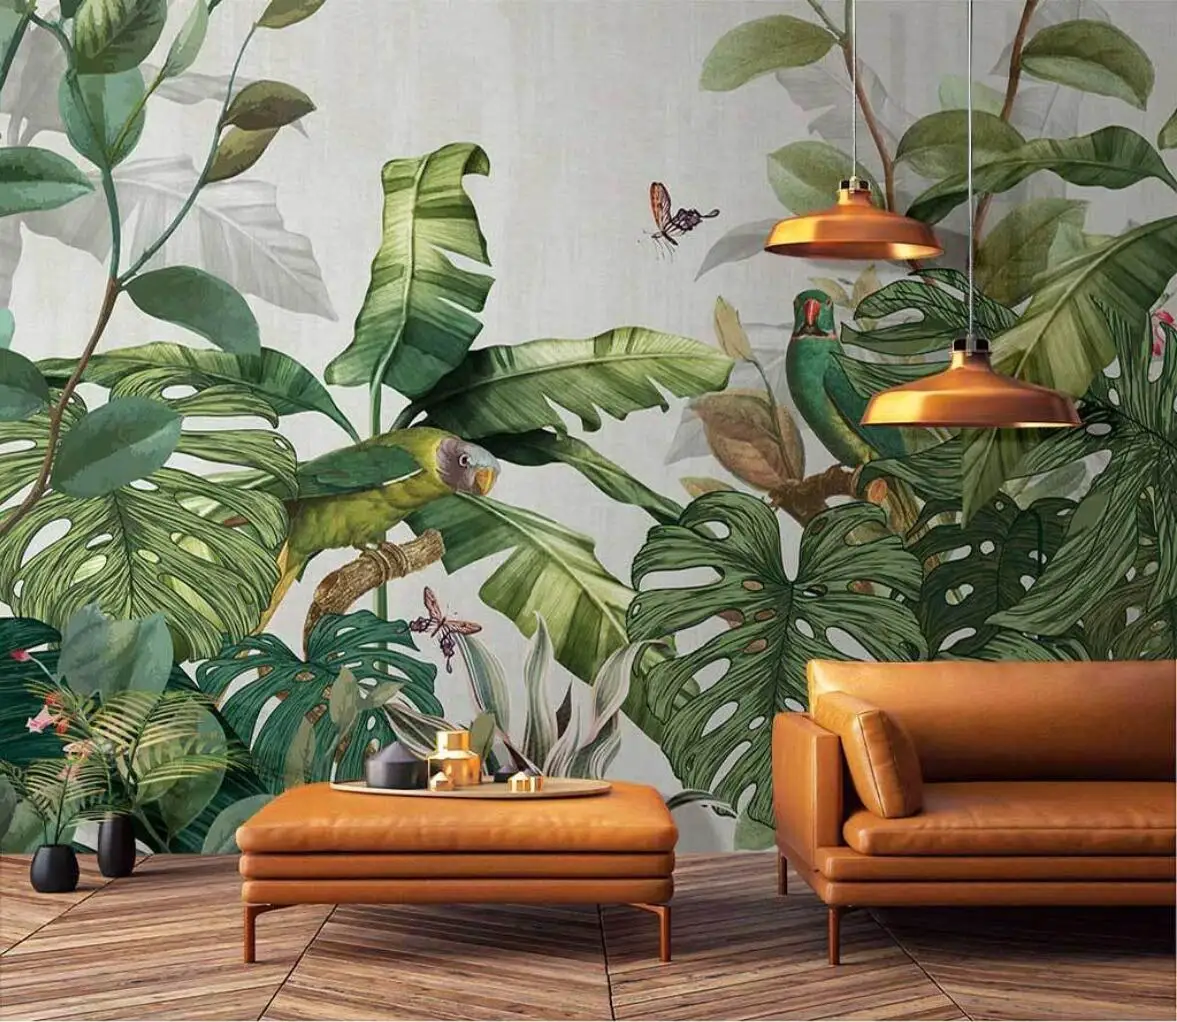 

beibehang Custom 3d wallpaper mural Nordic hand-painted tropical rainforest Southeast Asia jungle plants indoor background wall